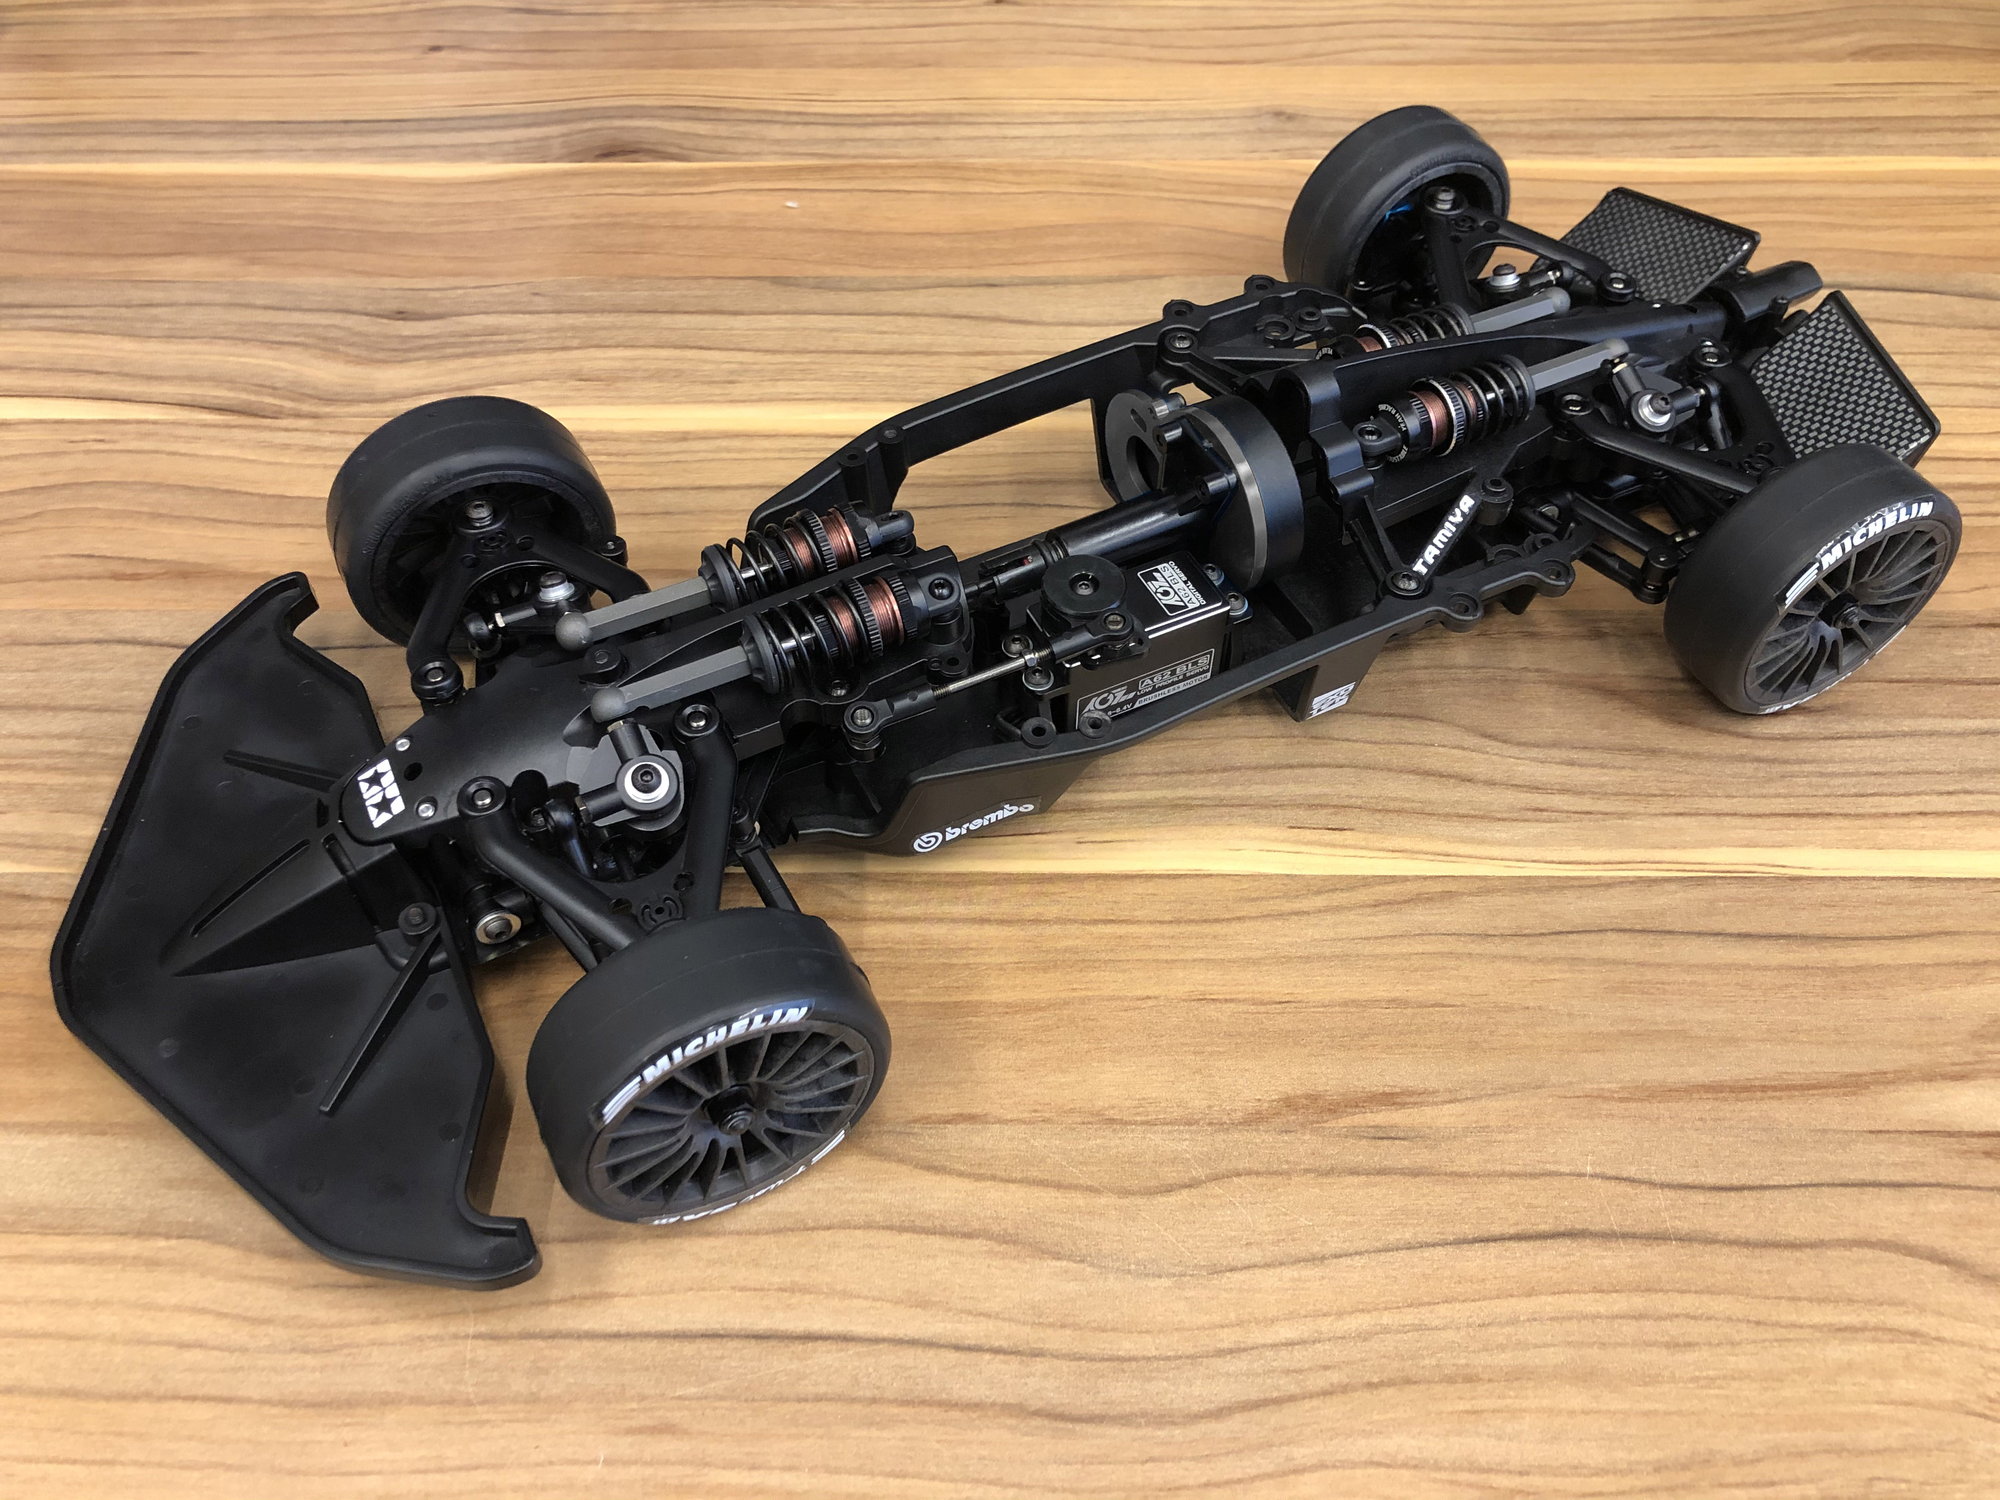 New Tamiya Chassis Tc 01 Page 41 R C Tech Forums